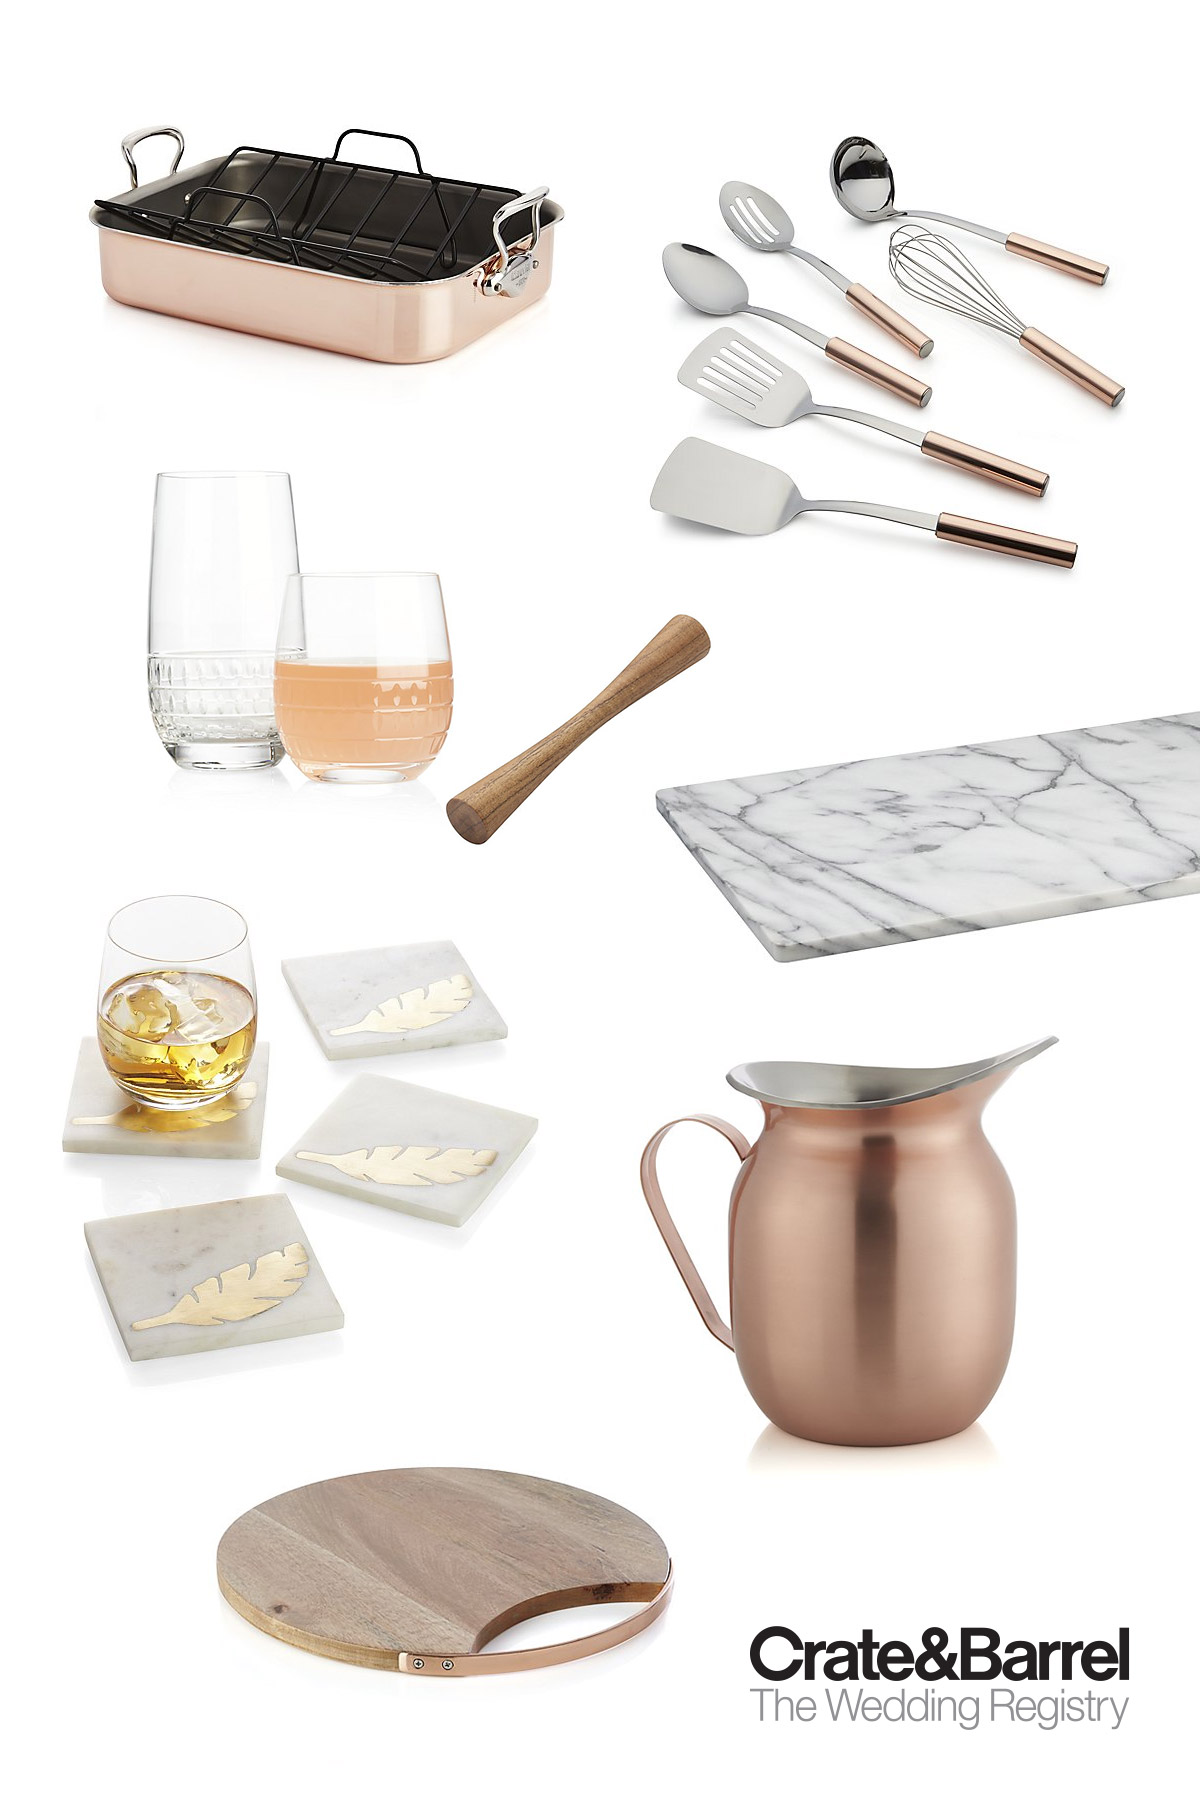 crate and barrel wedding registry 2017 metal marble gifts